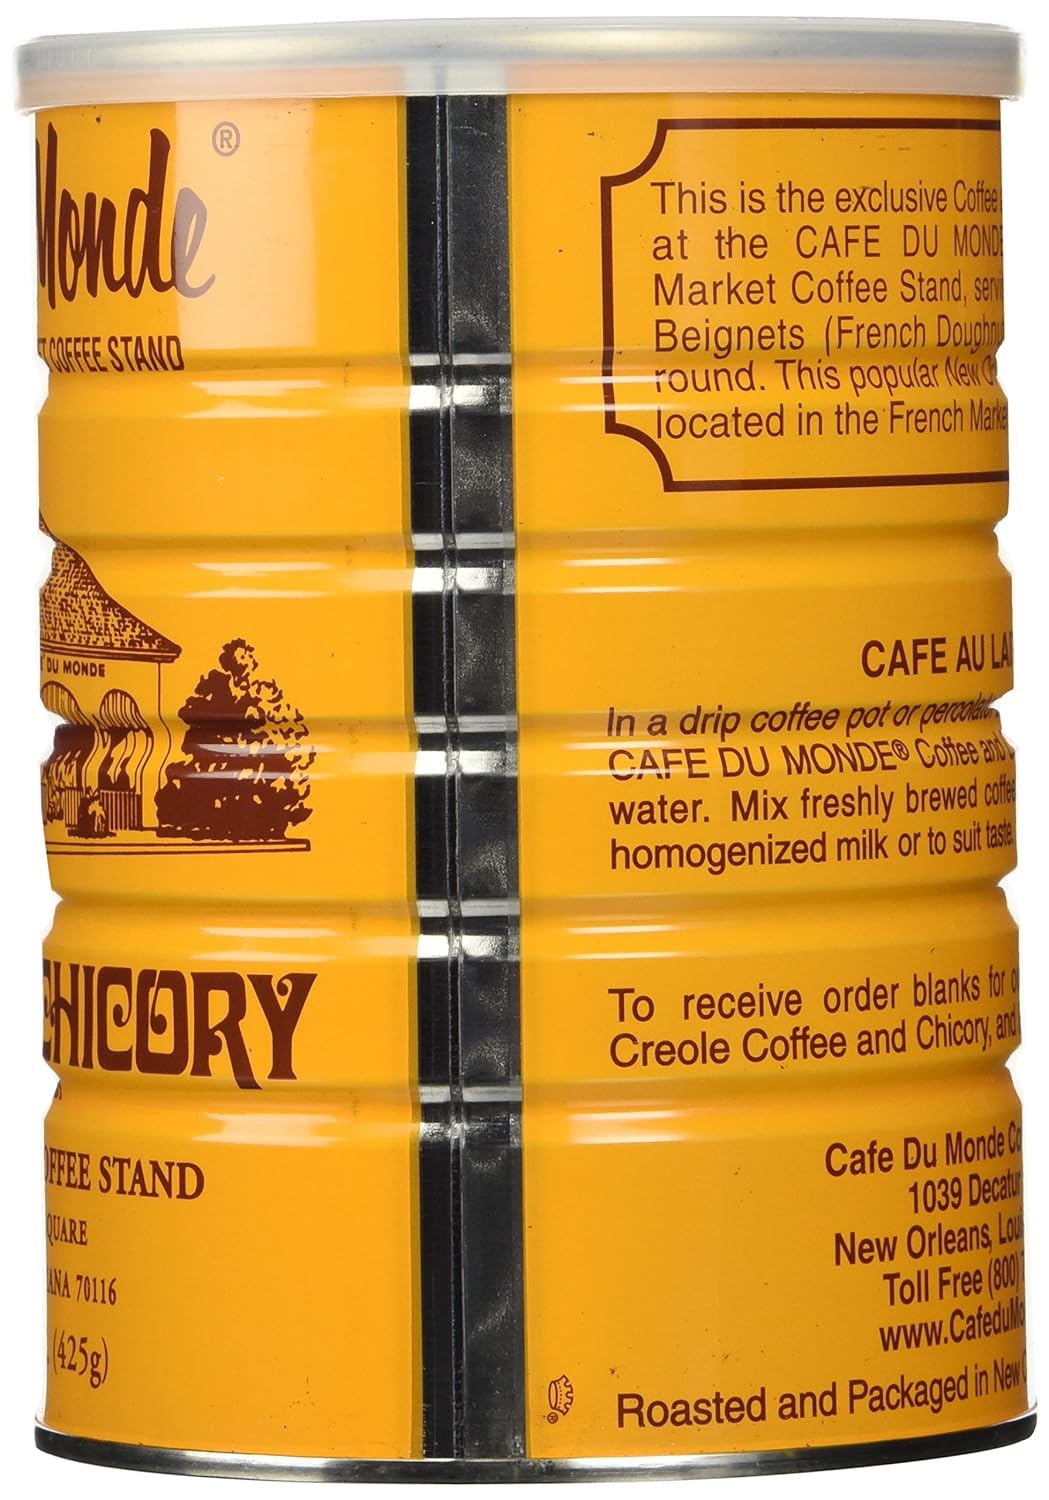 Cafe Du Monde Coffee with Chicory, 15-Ounce (Pack of 2)